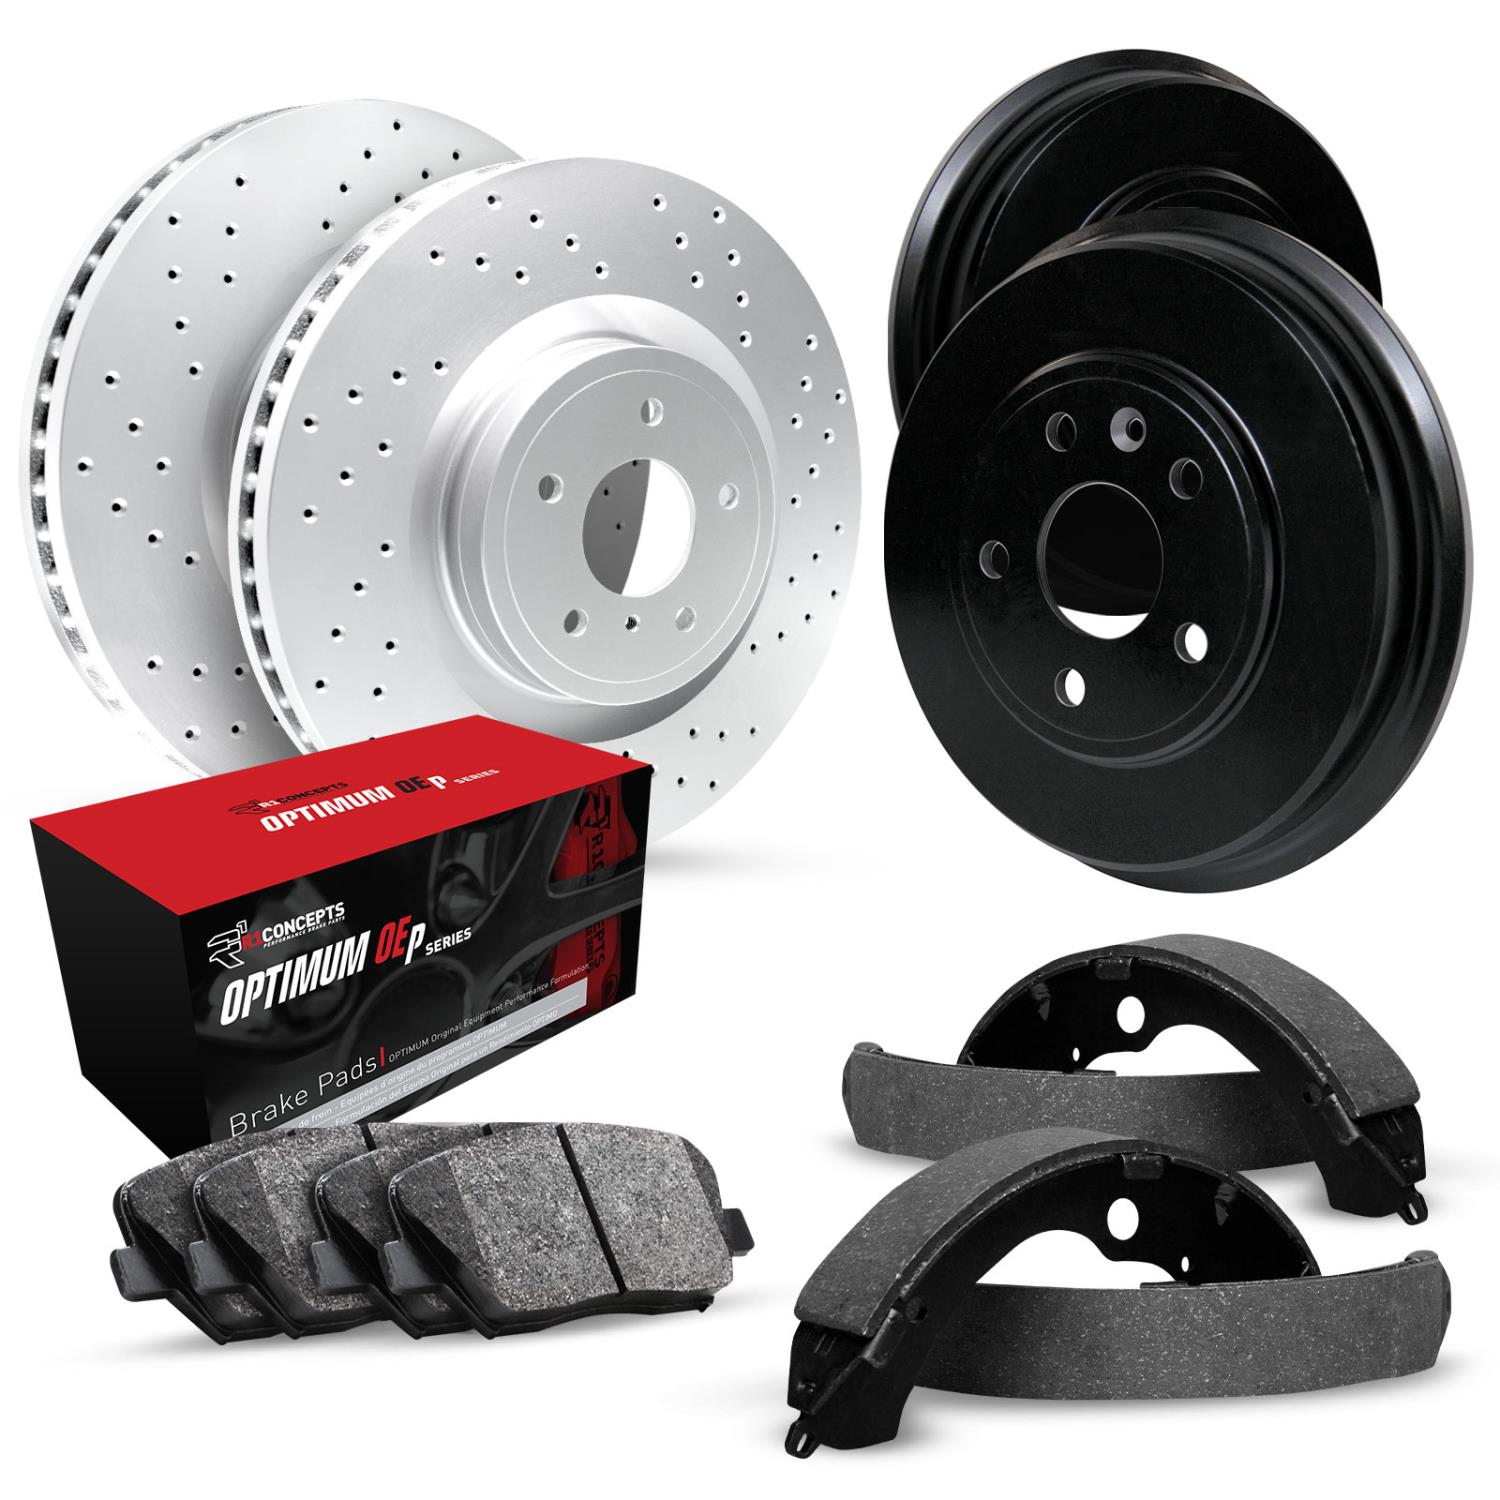 GEO-Carbon Drilled Brake Rotor & Drum Set w/Optimum OE Pads & Shoes, 1989-2002 Infiniti/Nissan, Position: Front & Rear